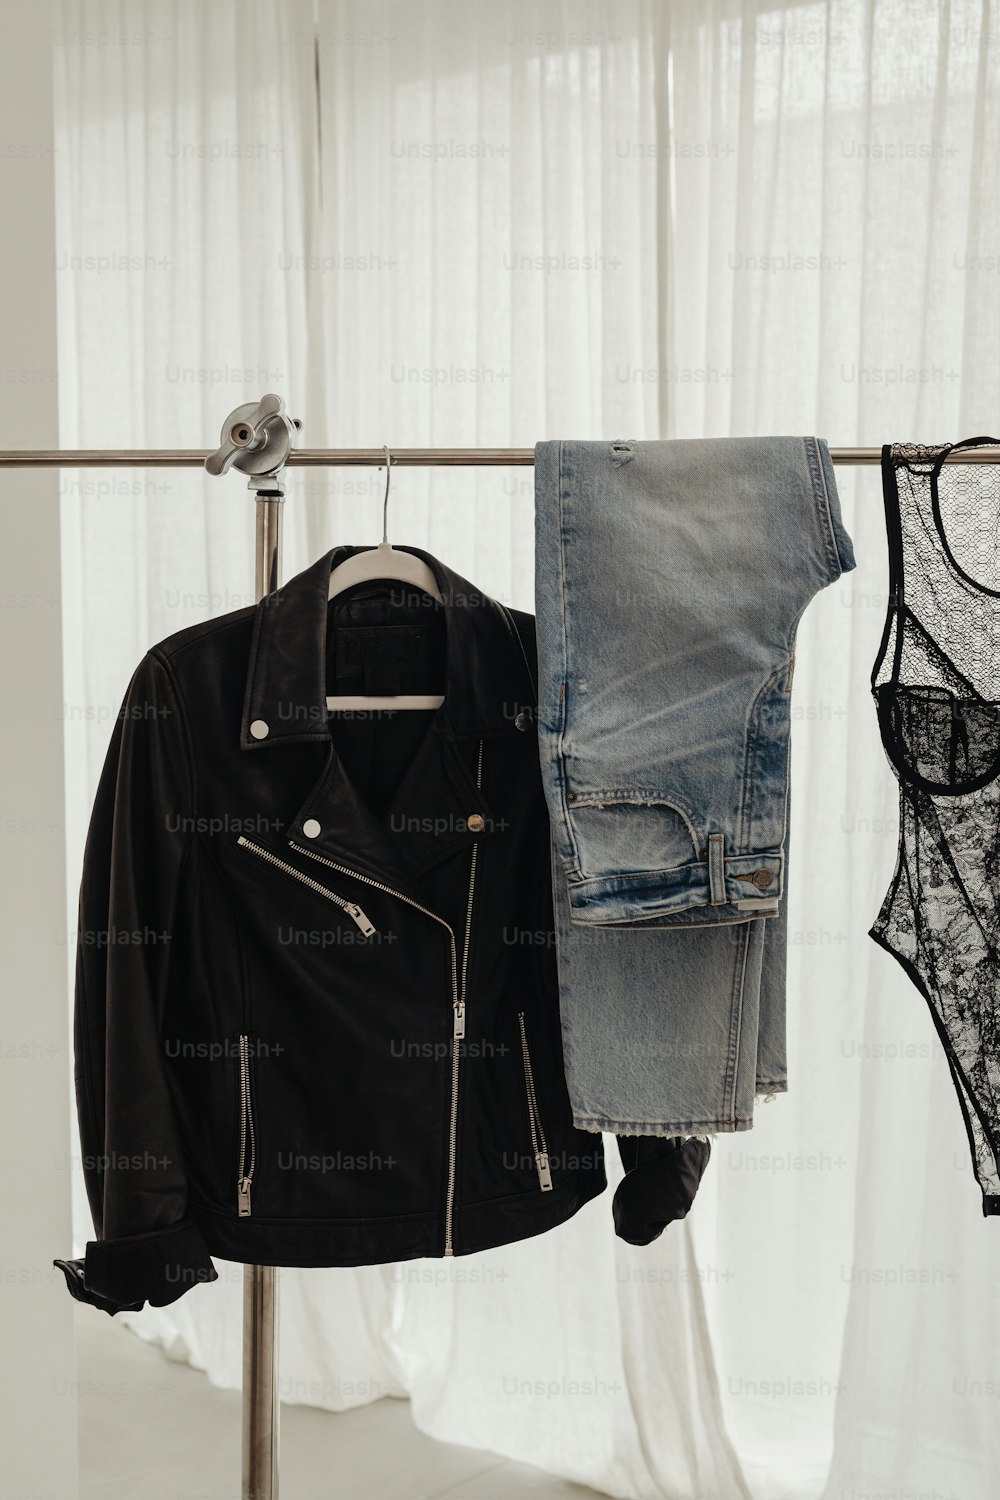 a pair of jeans and a jacket hanging on a clothes rack